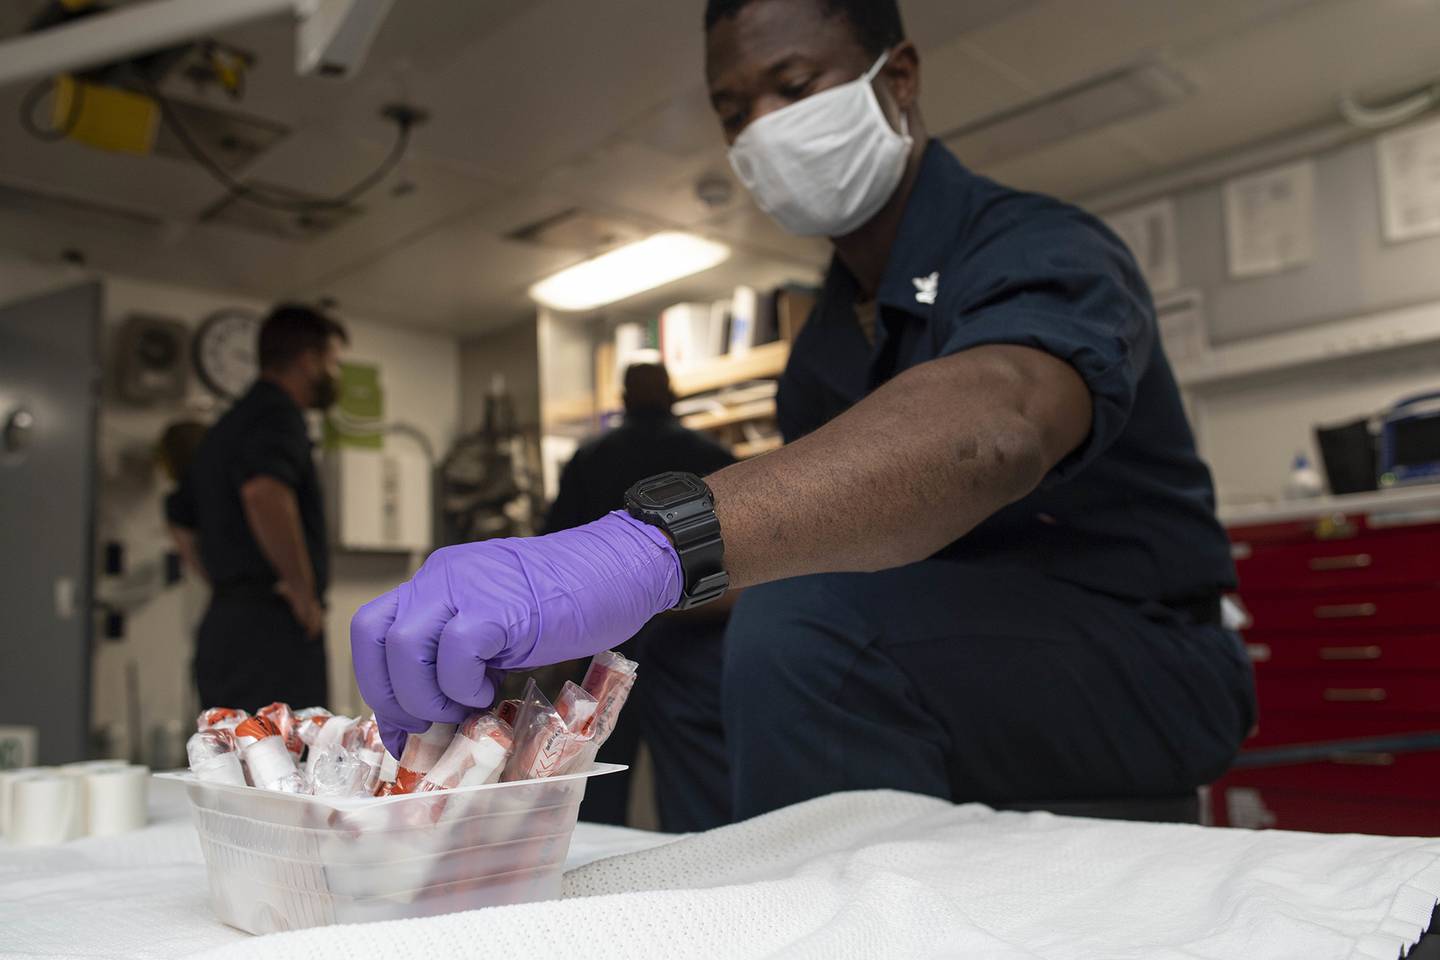 Hospital Corpsman 2nd Class Eric Hayford collects sealed COVID-19 test samples aboard the amphibious transport dock ship USS New Orleans (LPD 18) on Aug. 12, 2020, in the Sea of Japan.